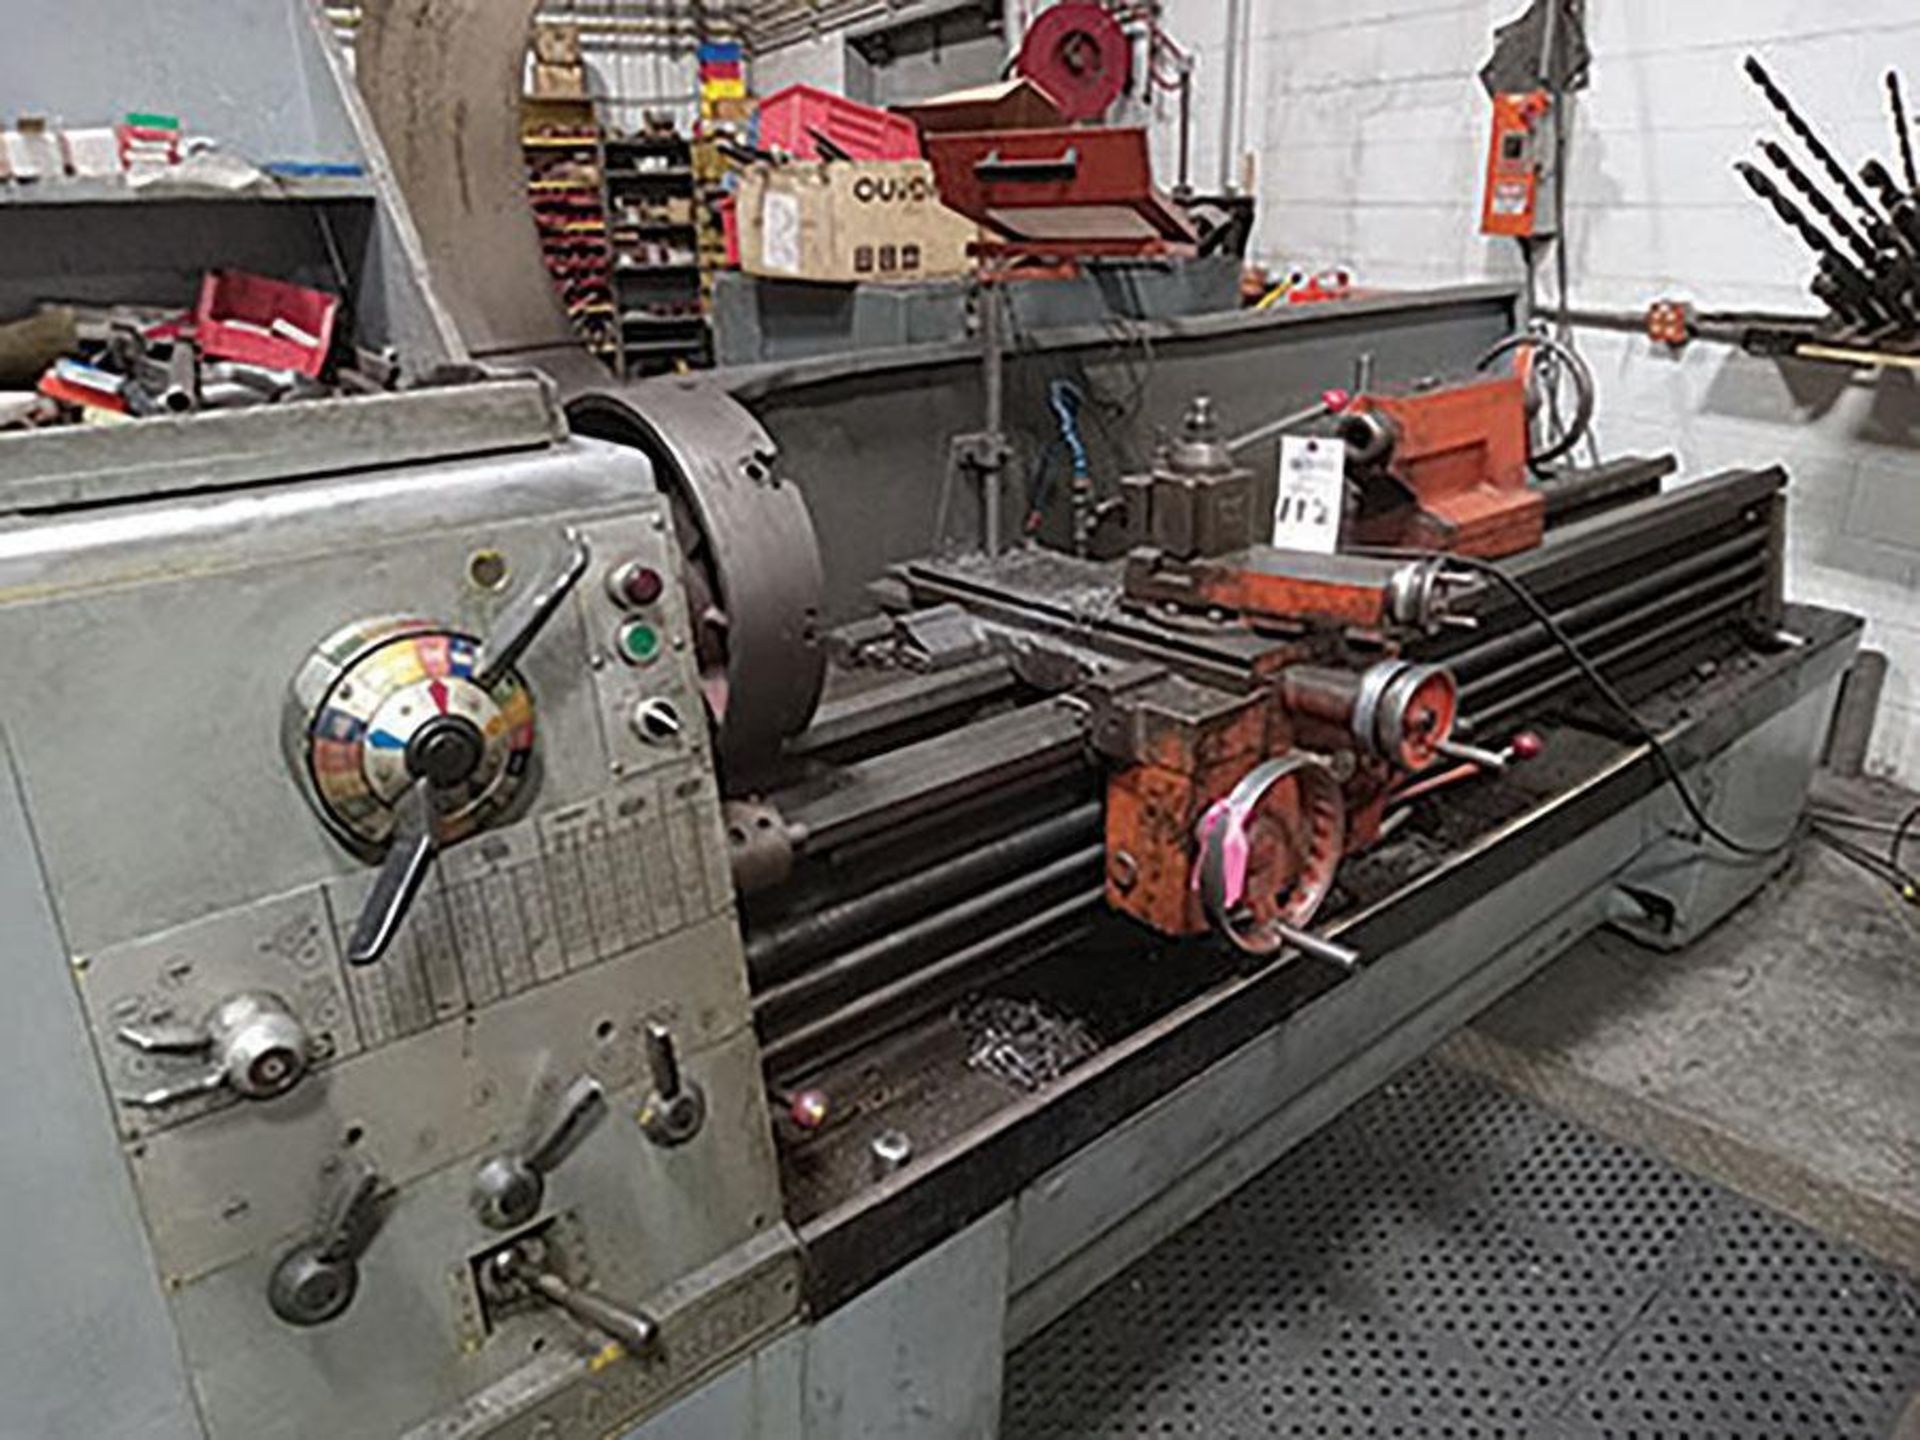 Clausing Colchester 17" Engine Lathe, 17" Swing x 80" Between Centers, 3-Jaw Chuck, 4-Jaw Chuck, Tap